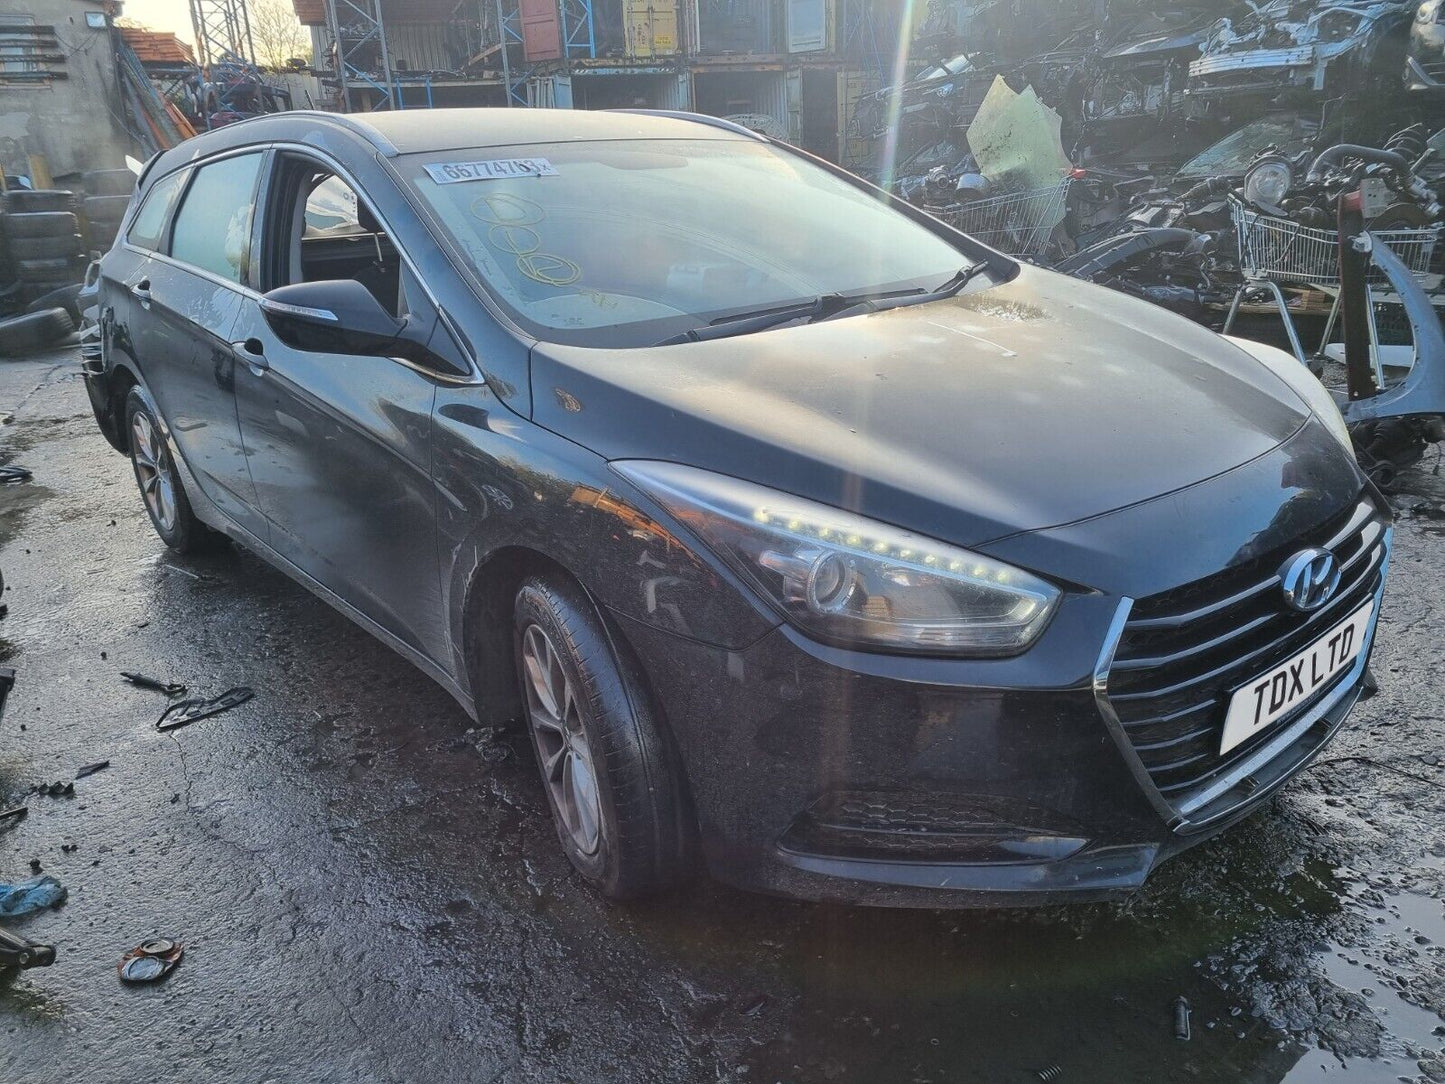 2016 HYUNDAI I40 (VF) BLUE DRIVE 1.7 DIESEL 6 SPEED MANUAL FOR PARTS & SPARES